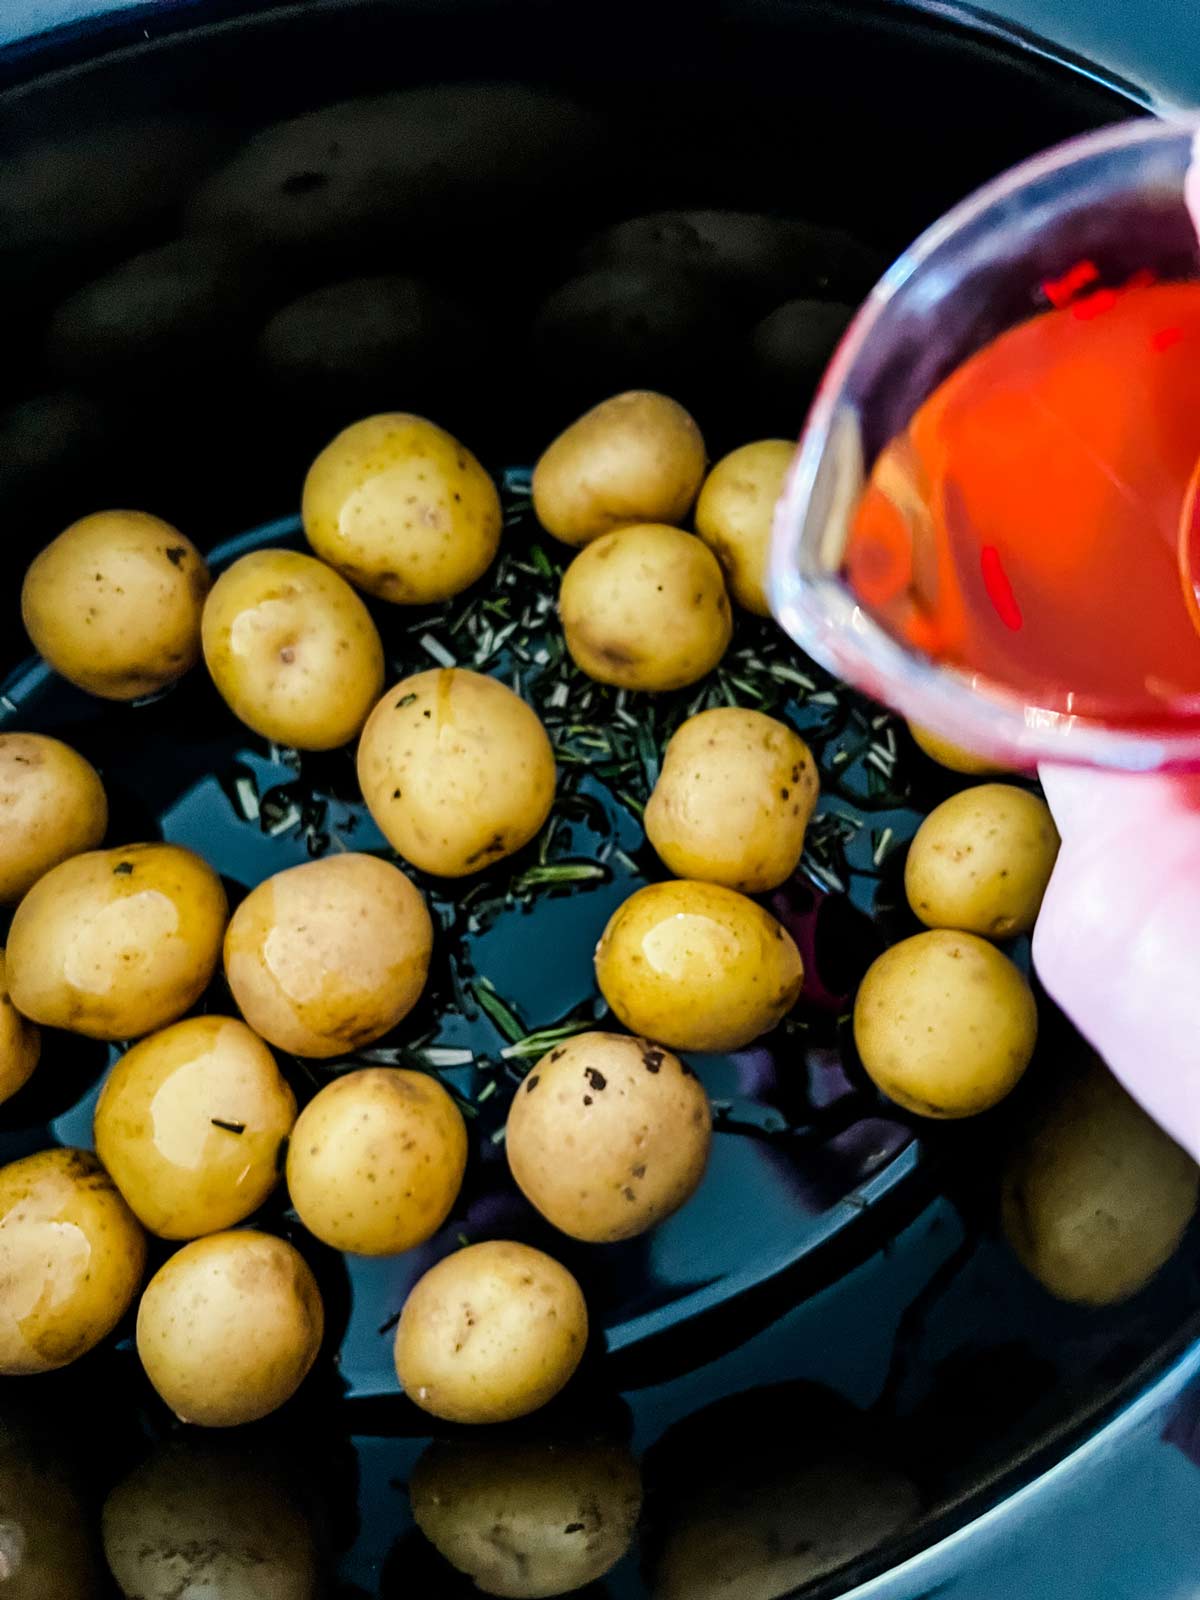 Oil being poured over baby potatoes in a slow cooker.